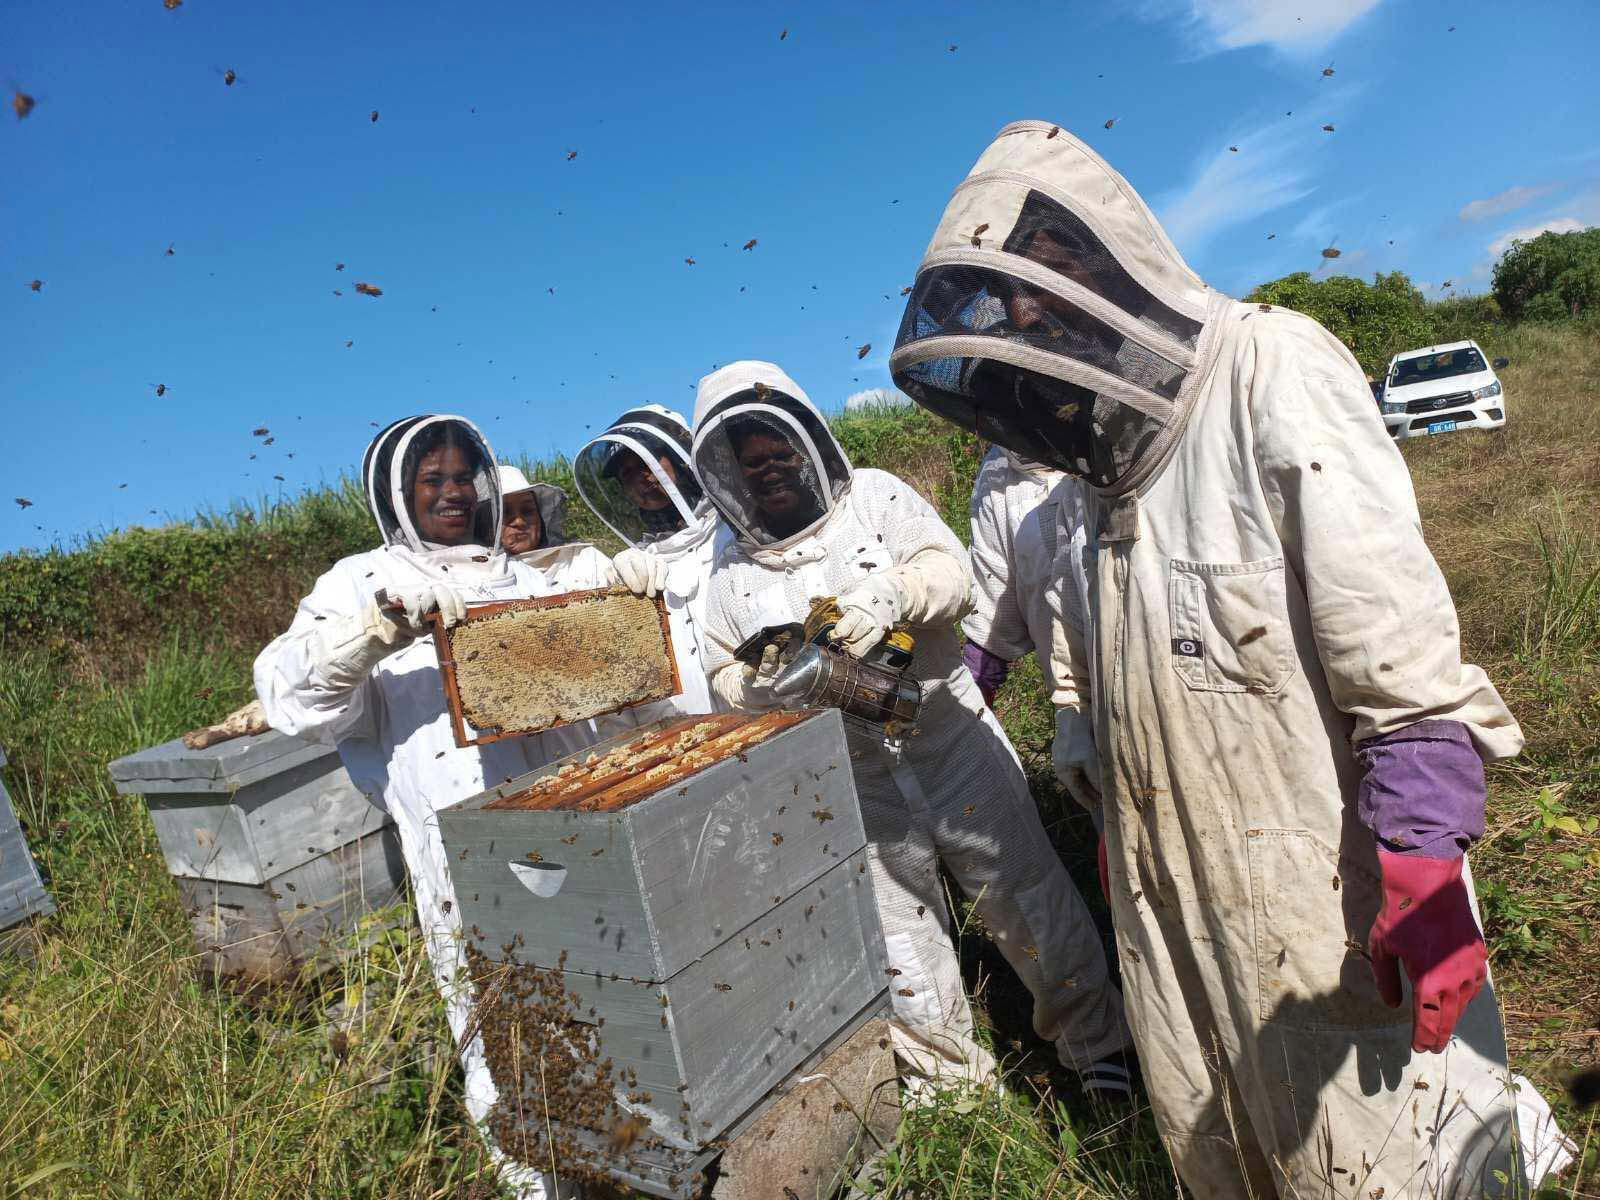 Beekeepers inspecting hive